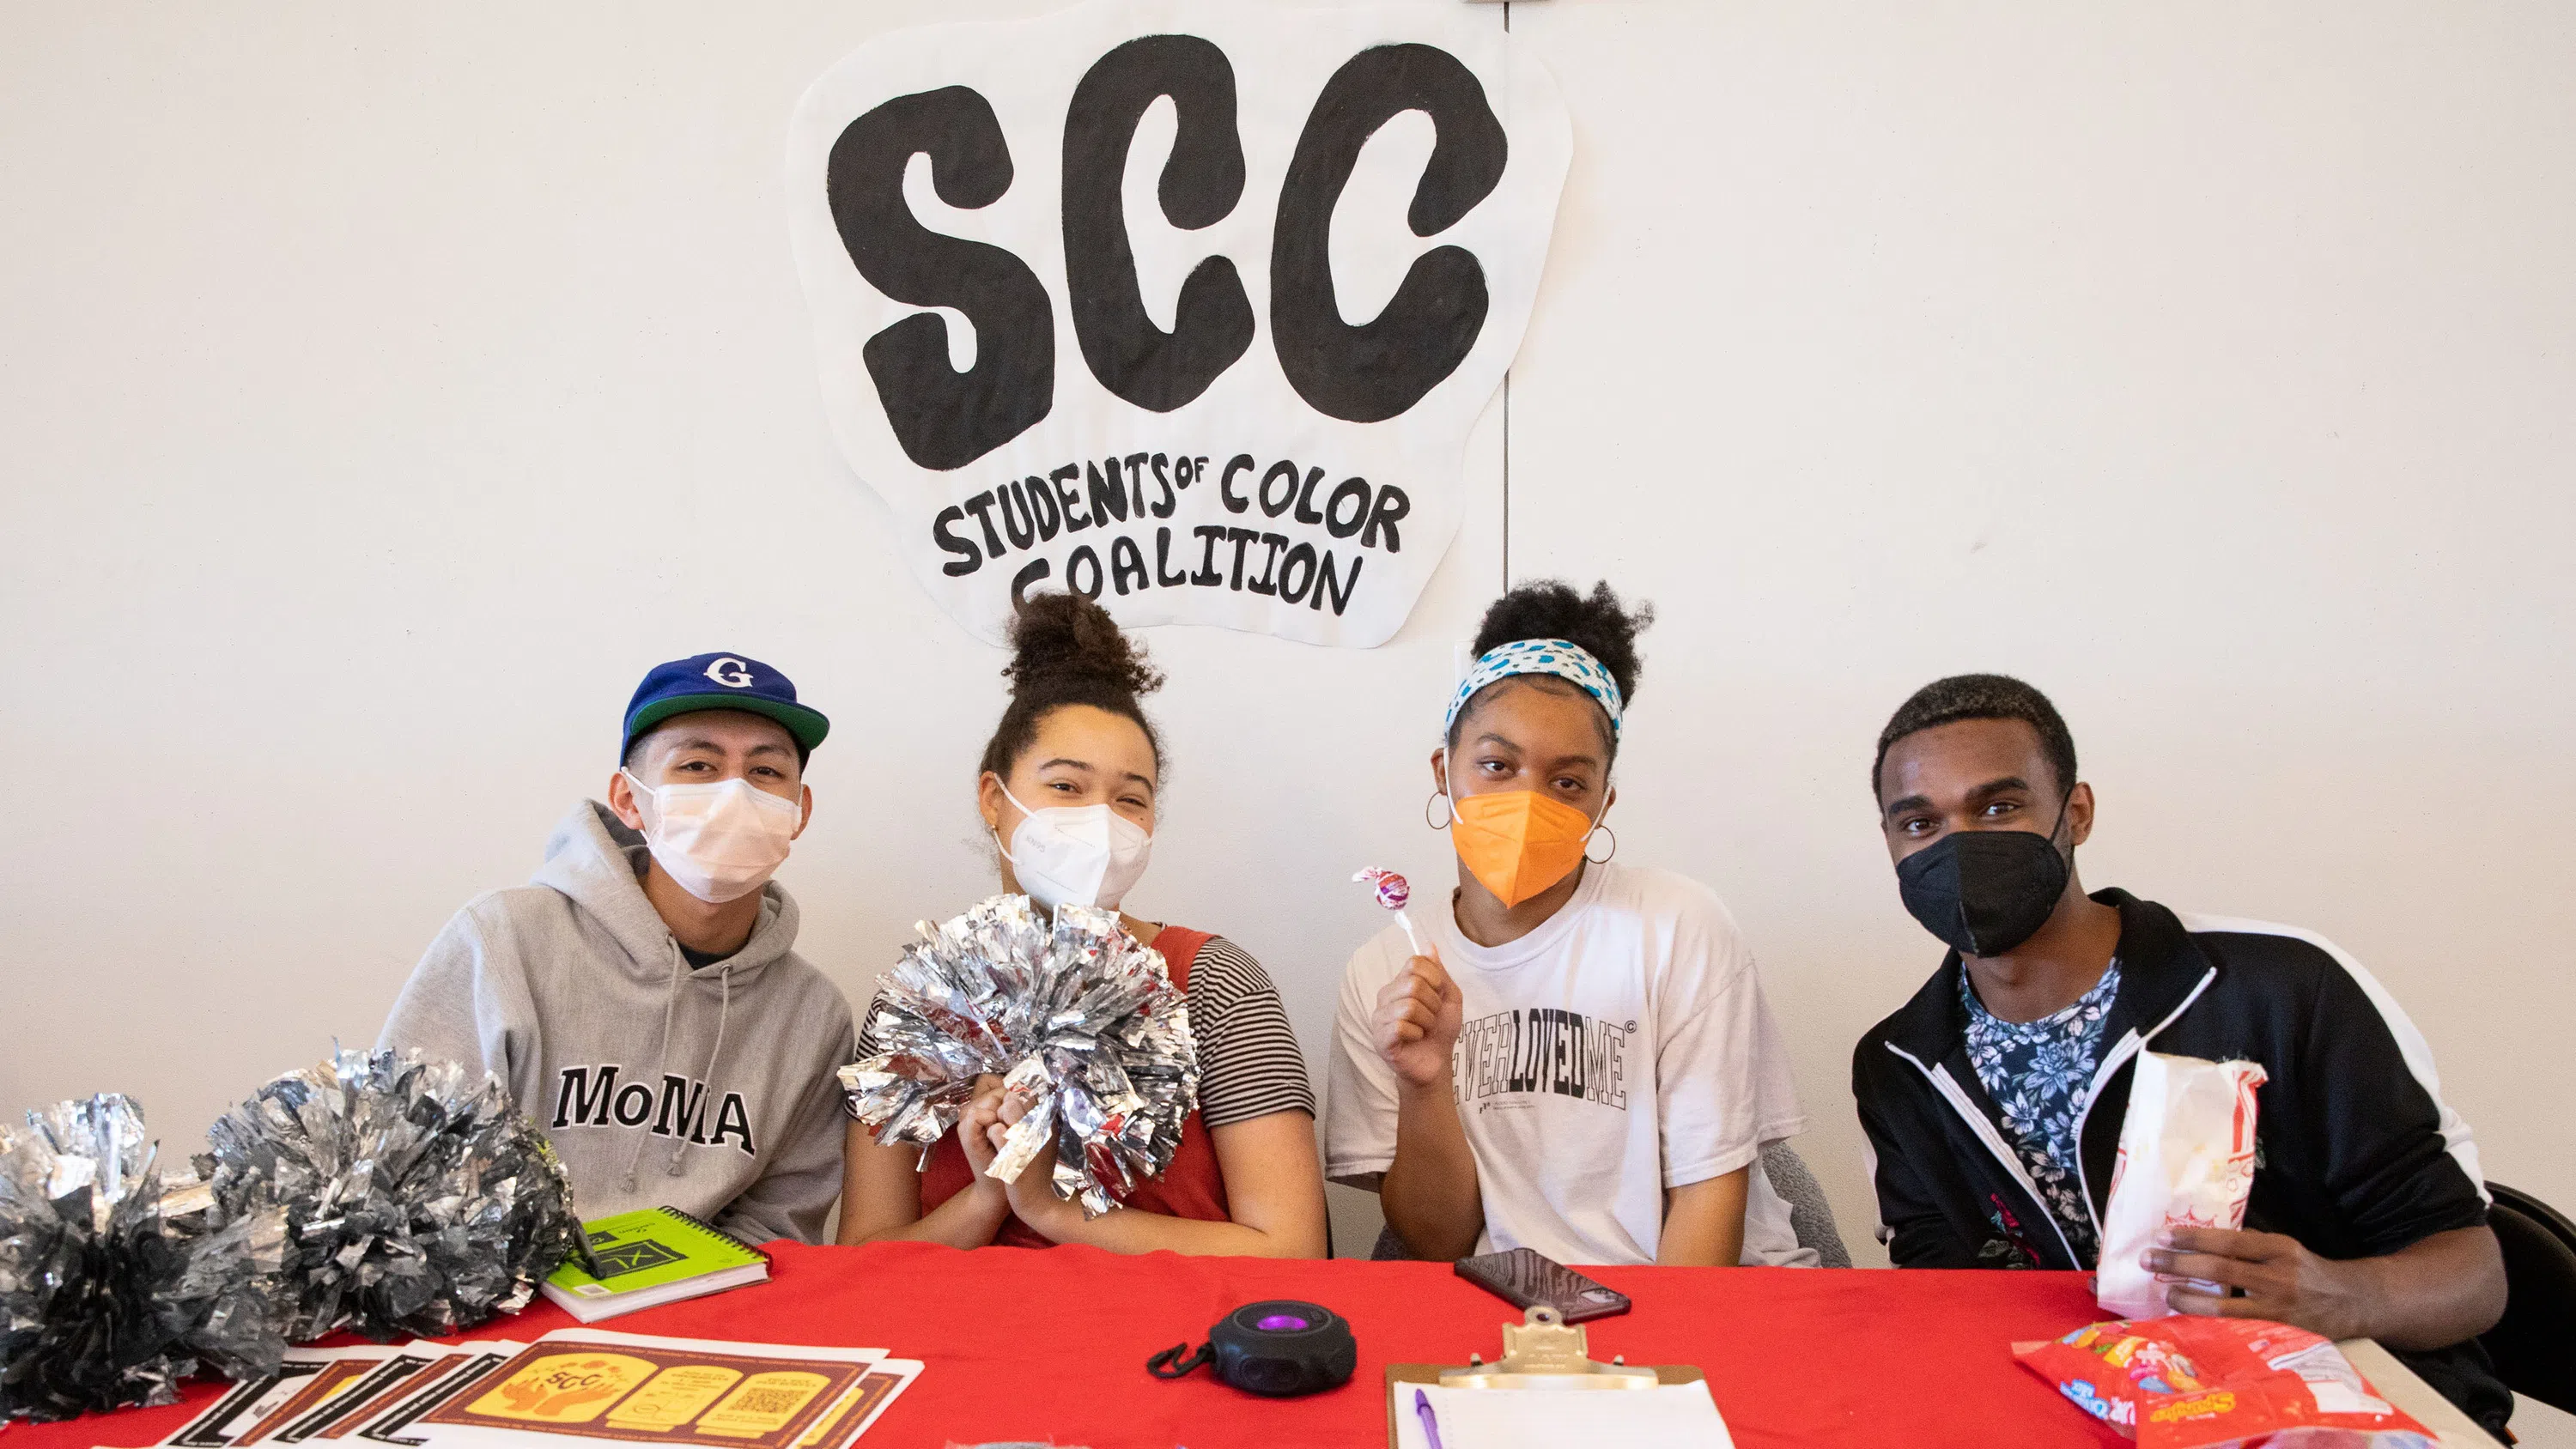 Four masked students sit at a table with a red tablecloth, candy, and collateral. Large letters on the wall behind them read SCC: Students of Color Coalition.